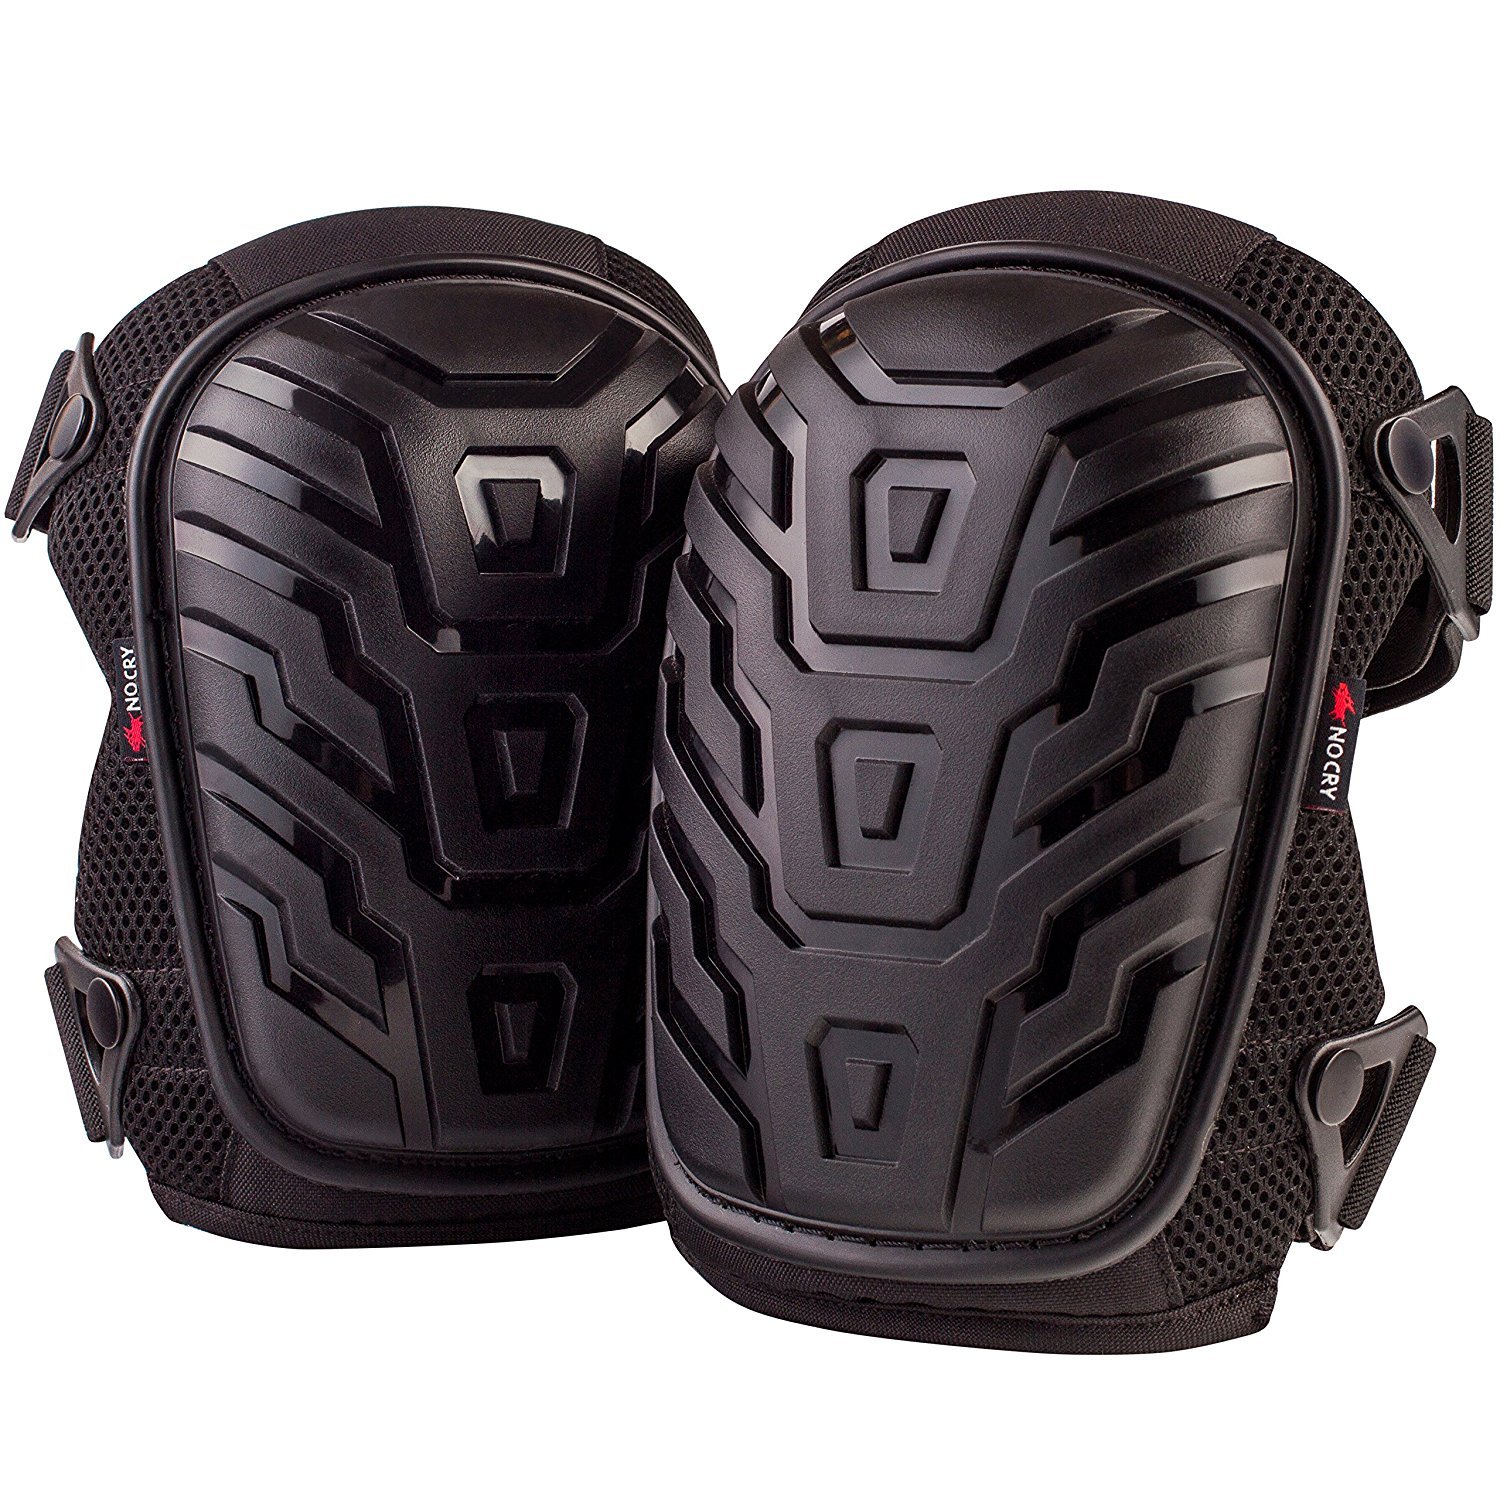 Best Knee Pads Reviews of 2020 at TopProducts.com